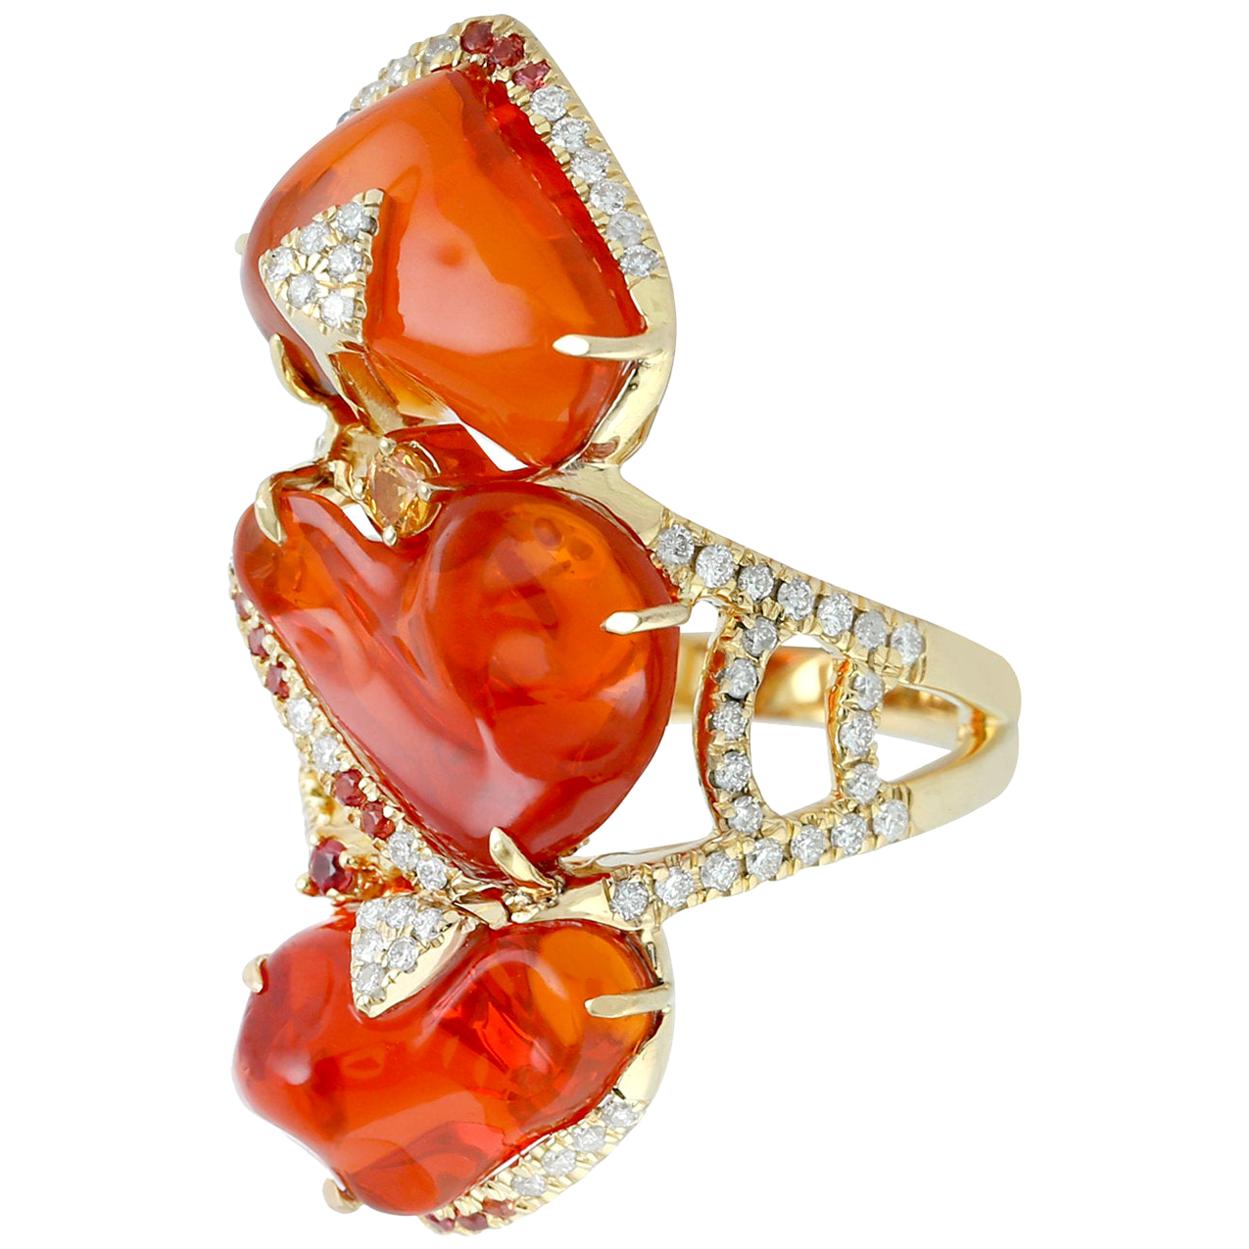 Stylish Fire Opal Ring with Diamonds and Sapphire Set in 18 Karat Gold For Sale